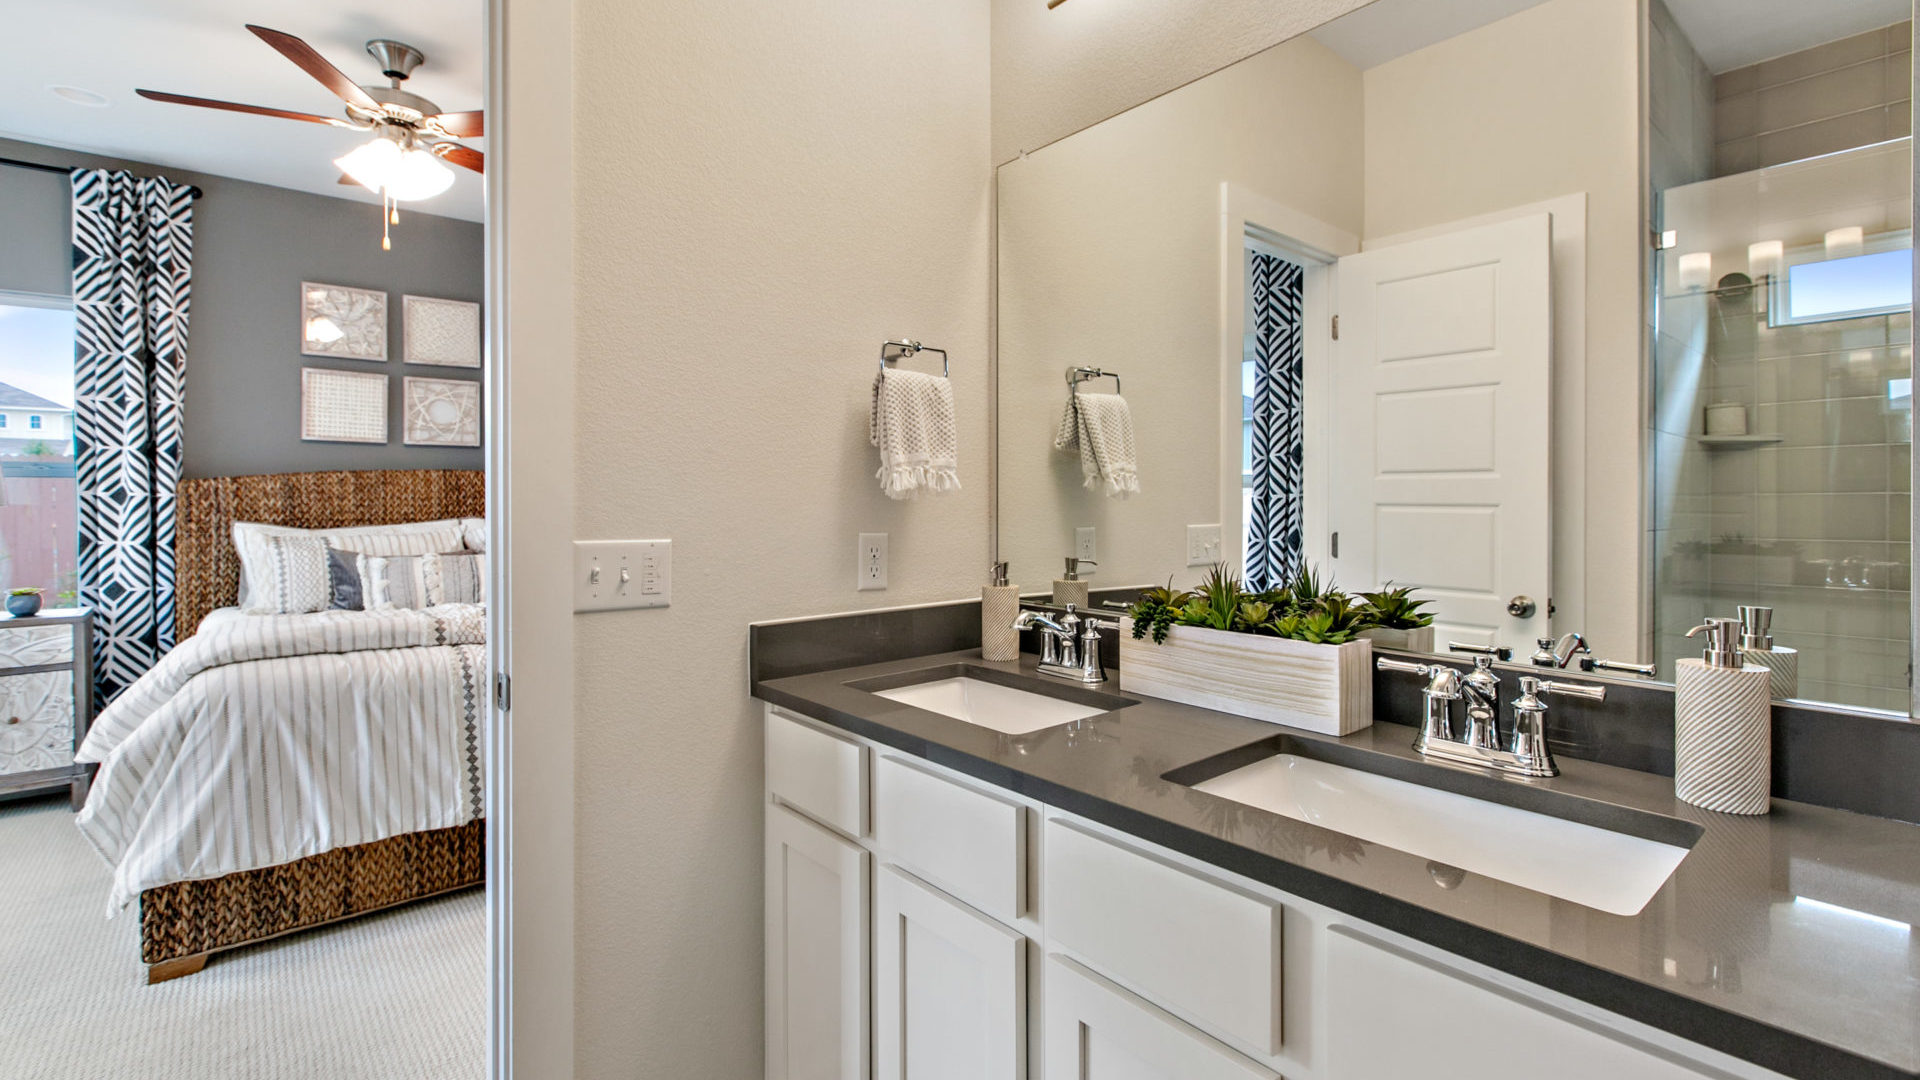 Vistas of Austin Community Model Home Master Bathroom With His and Hers Sink